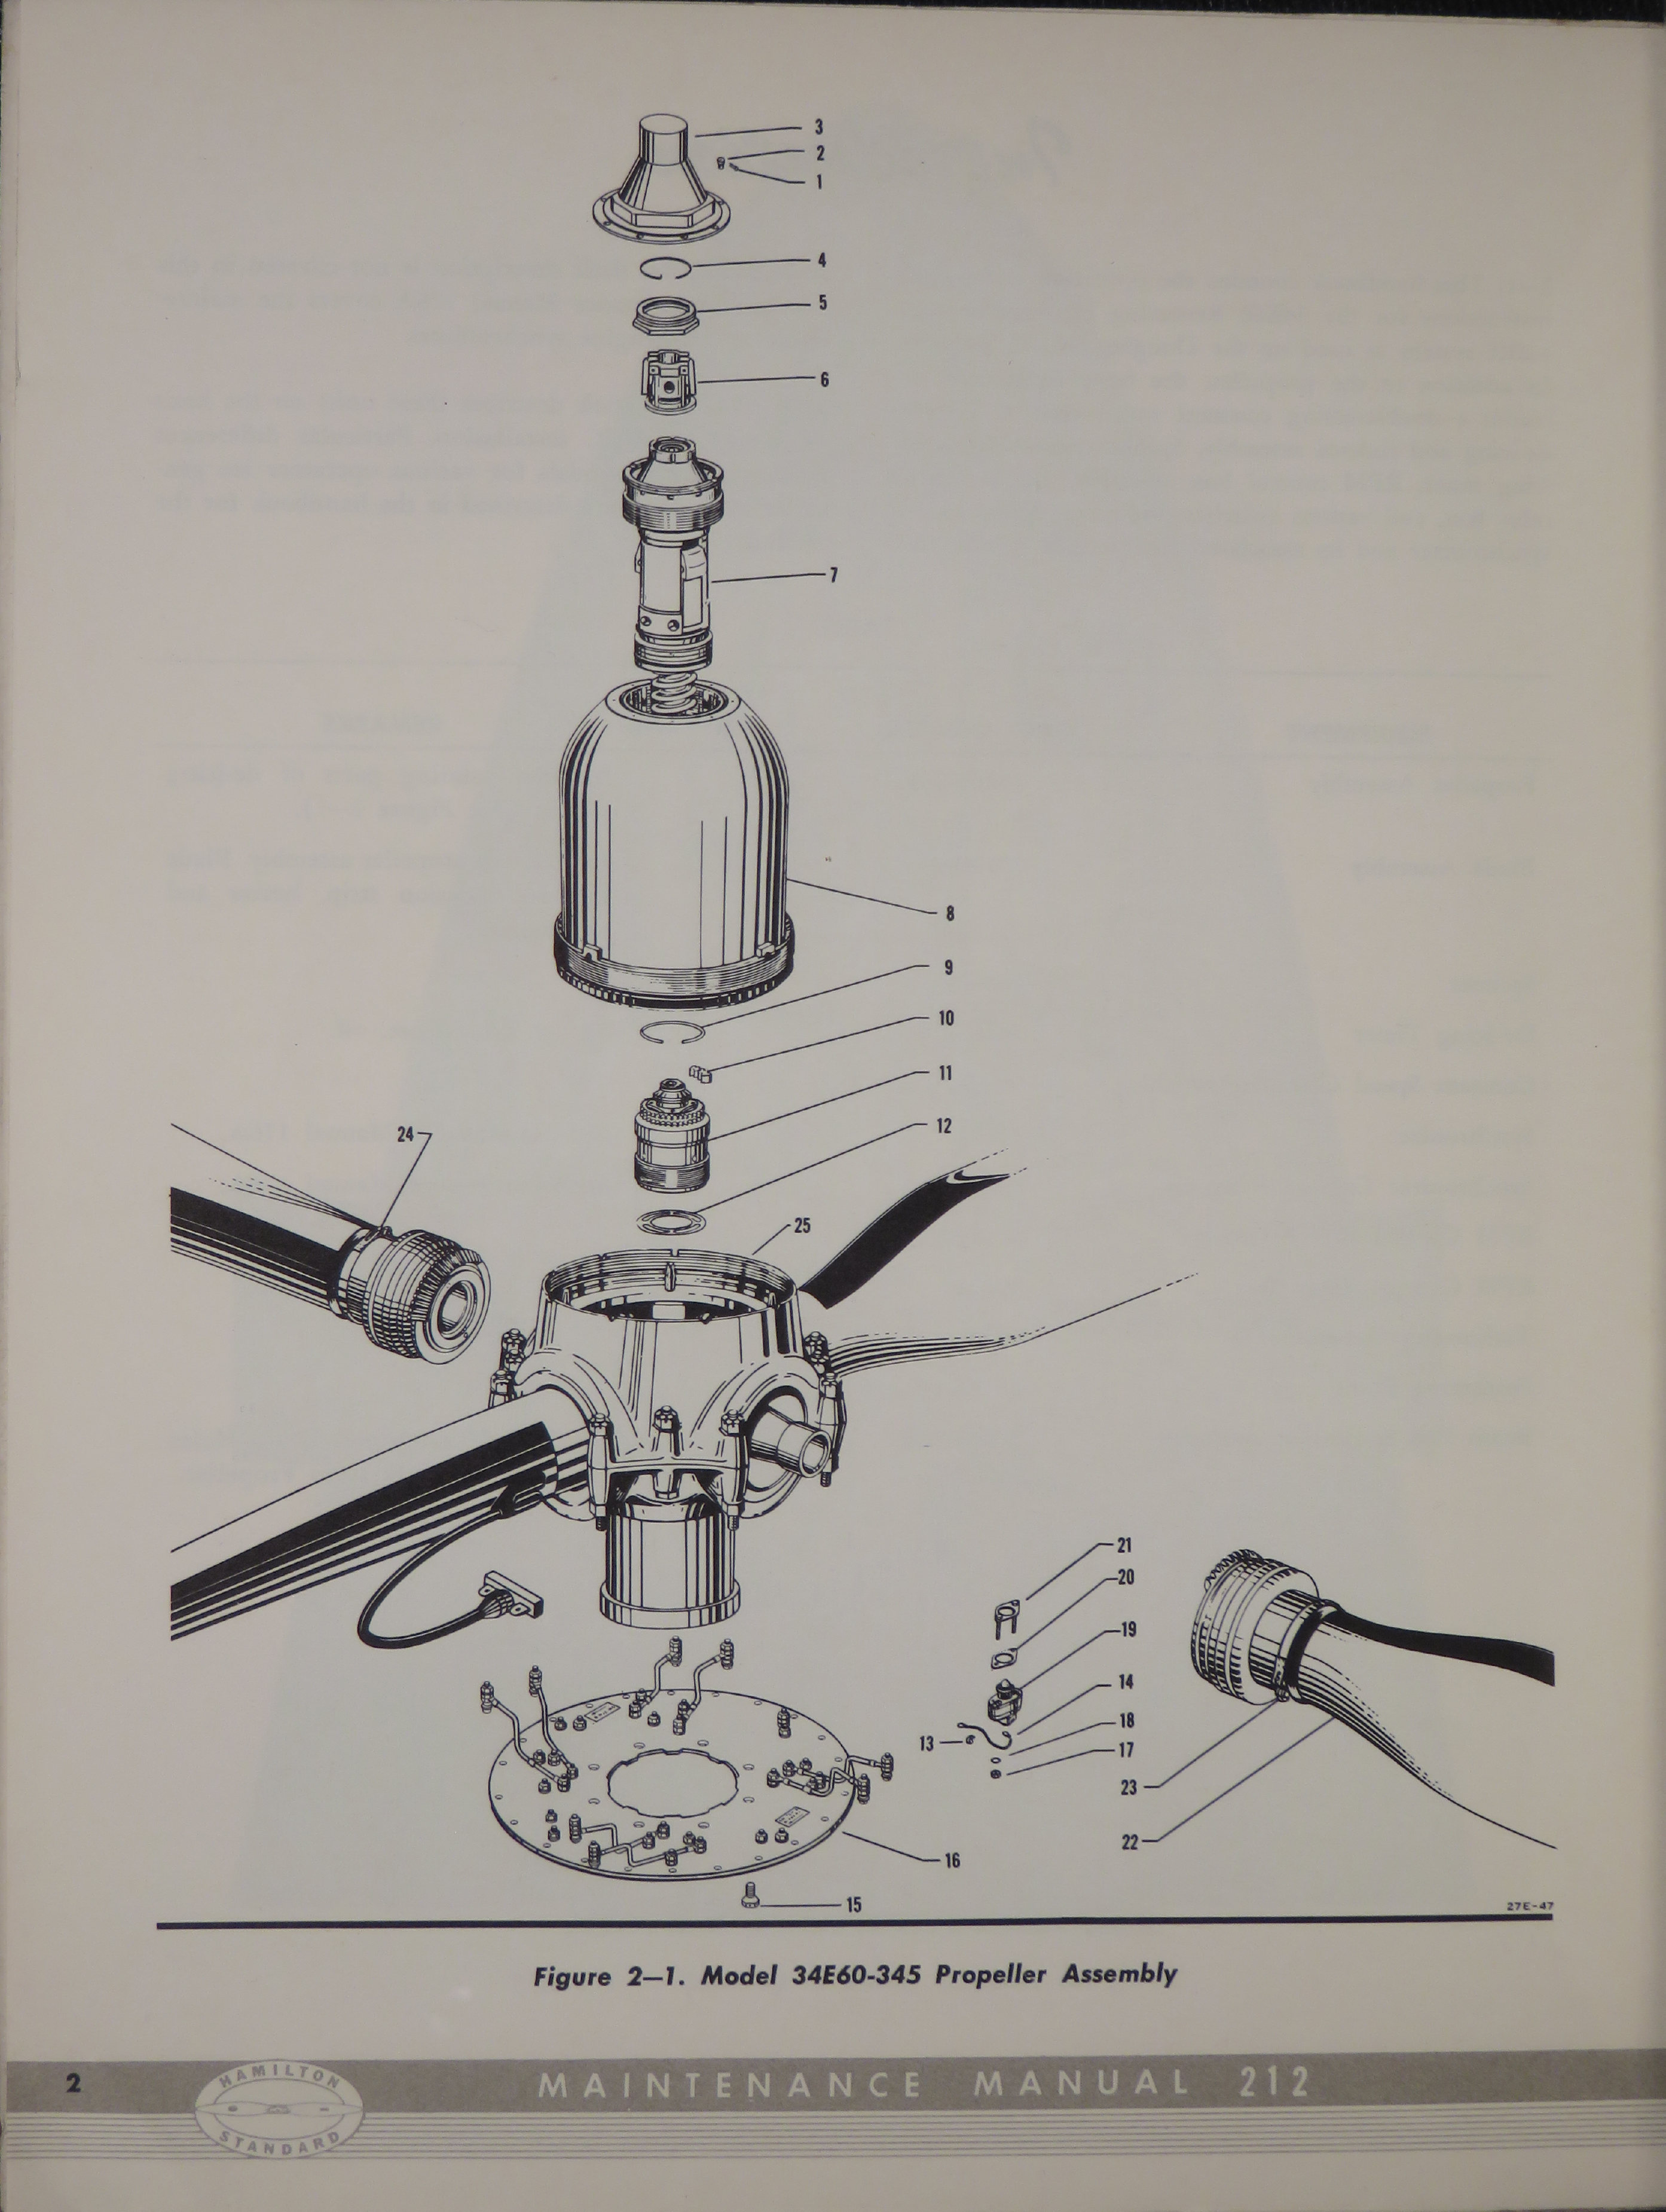 Sample page 8 from AirCorps Library document: Maintenance Manual for Hydromatic Propeller Model 34E60 for Douglas DC-7C 